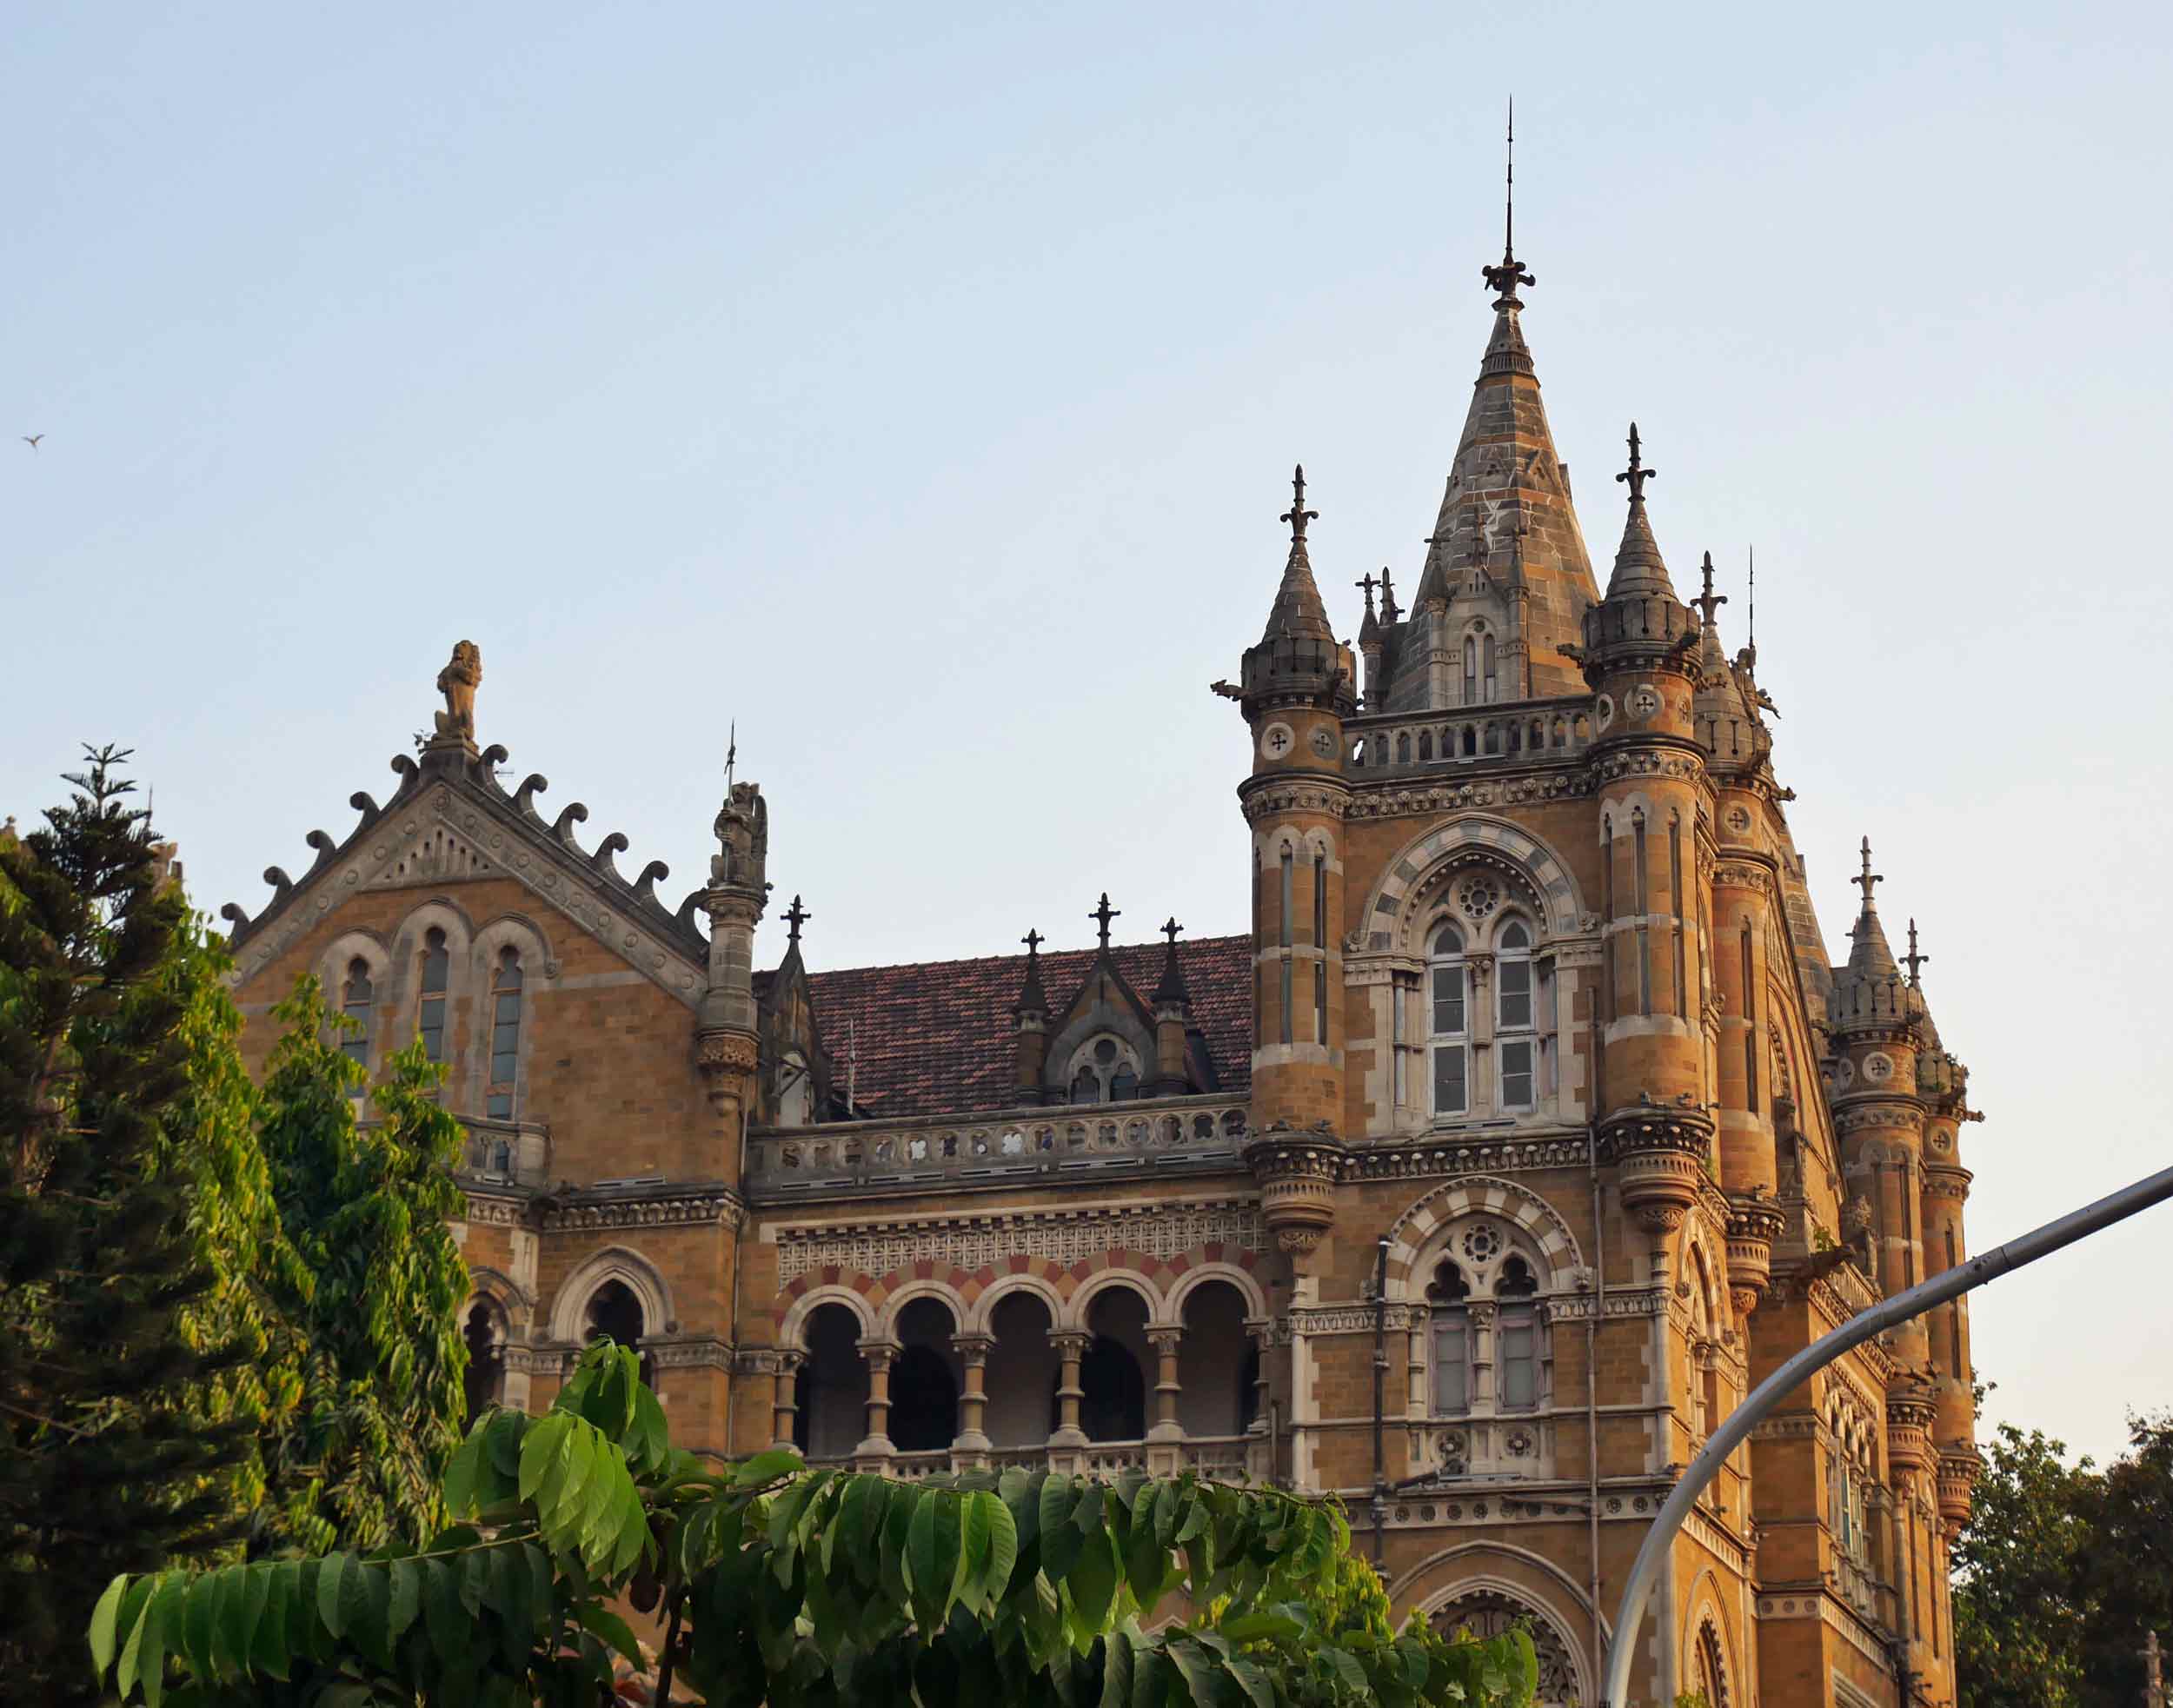  Another glorious example of the heritage architecture found throughout Mumbai.&nbsp; 